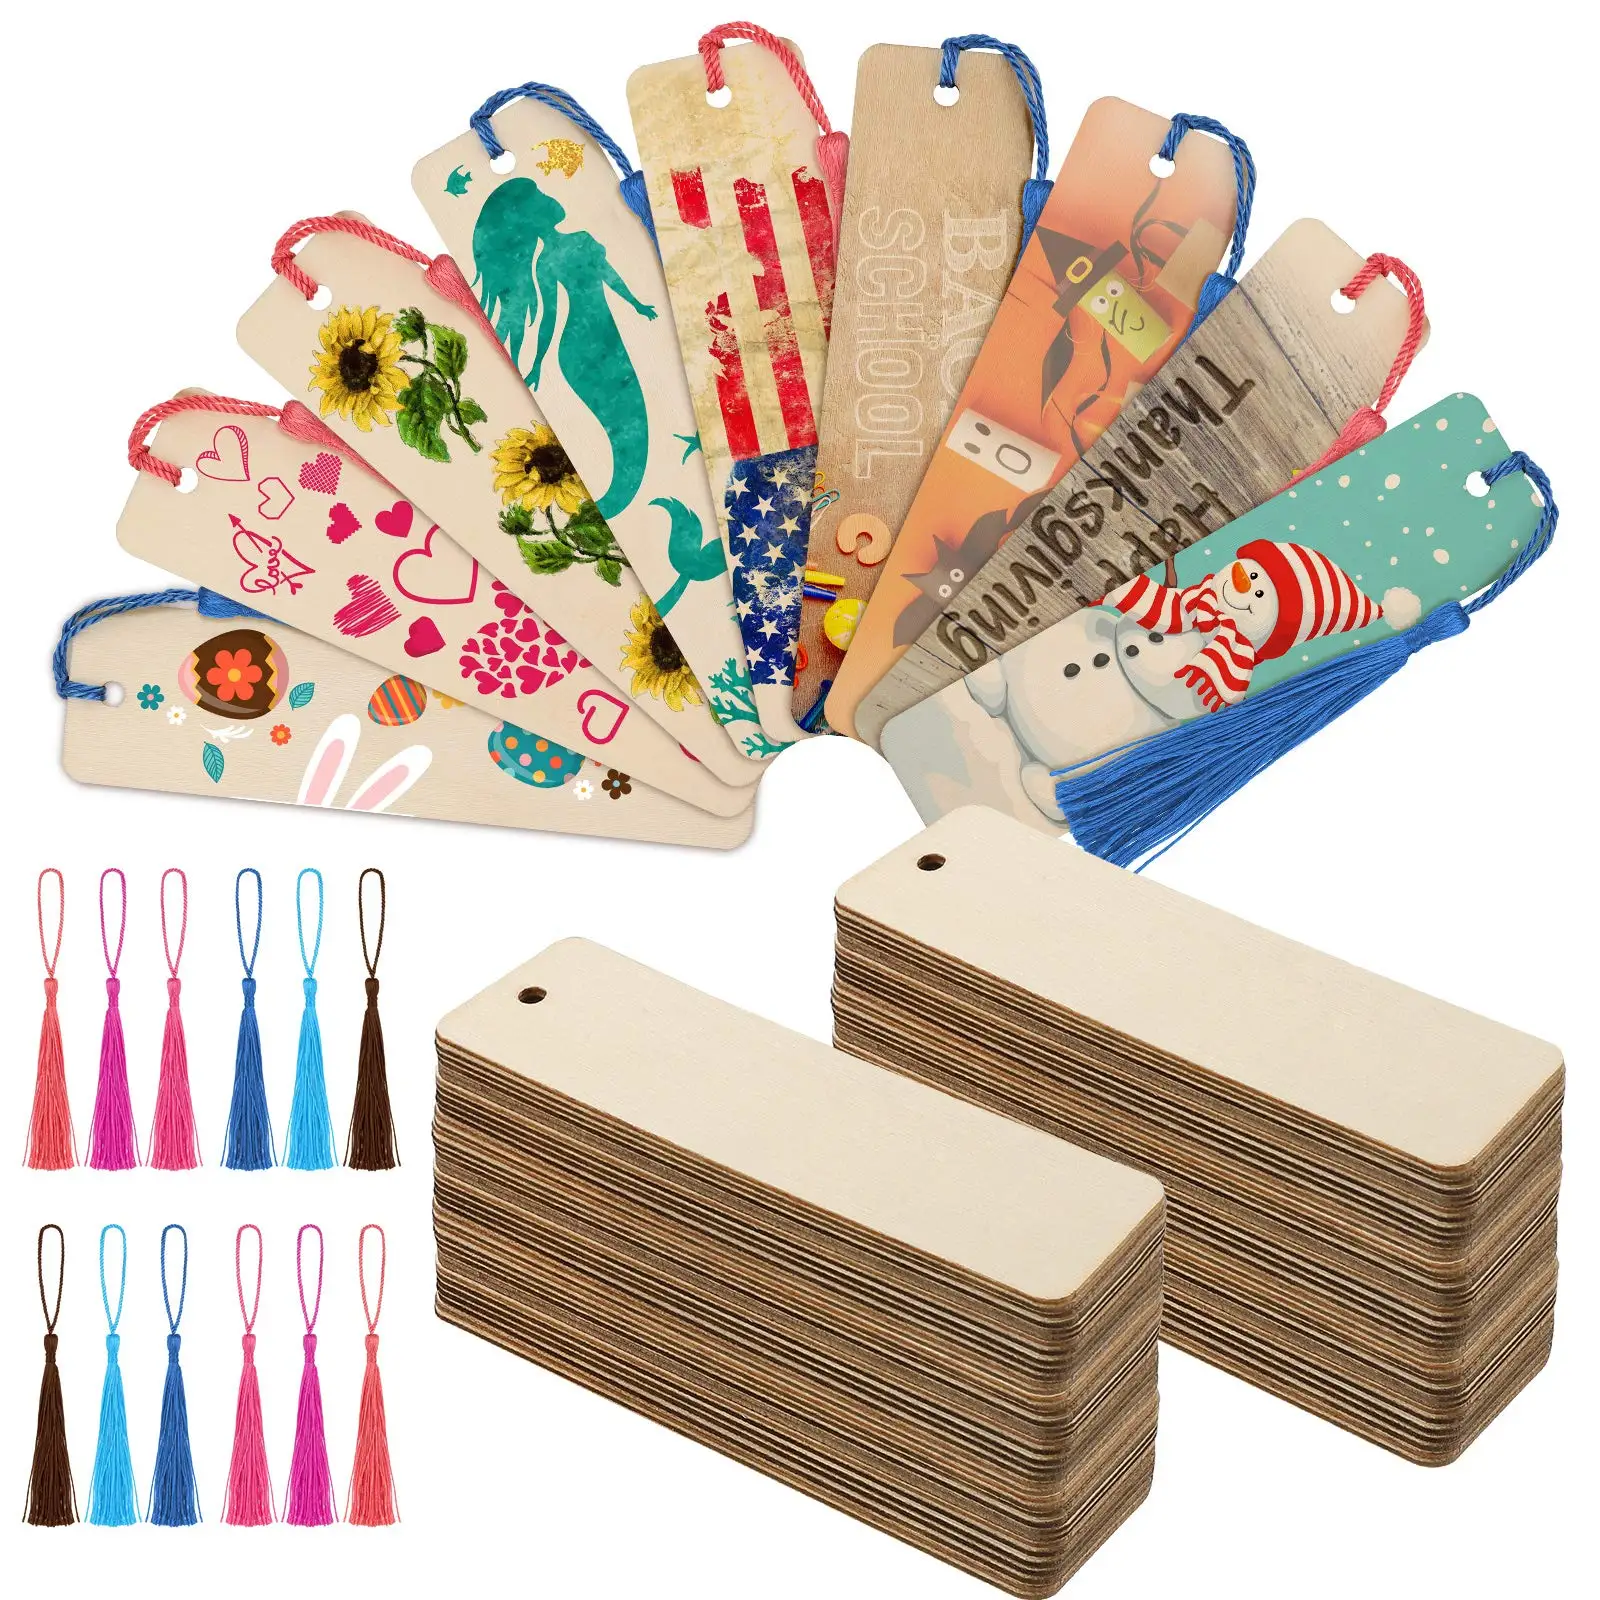 

36PCS Wood Bookmark Bulk Blank Bookmarks with Tassels Wooden Book Markers Rectangle Thin Hanging Tag with Holes for DIY Projects